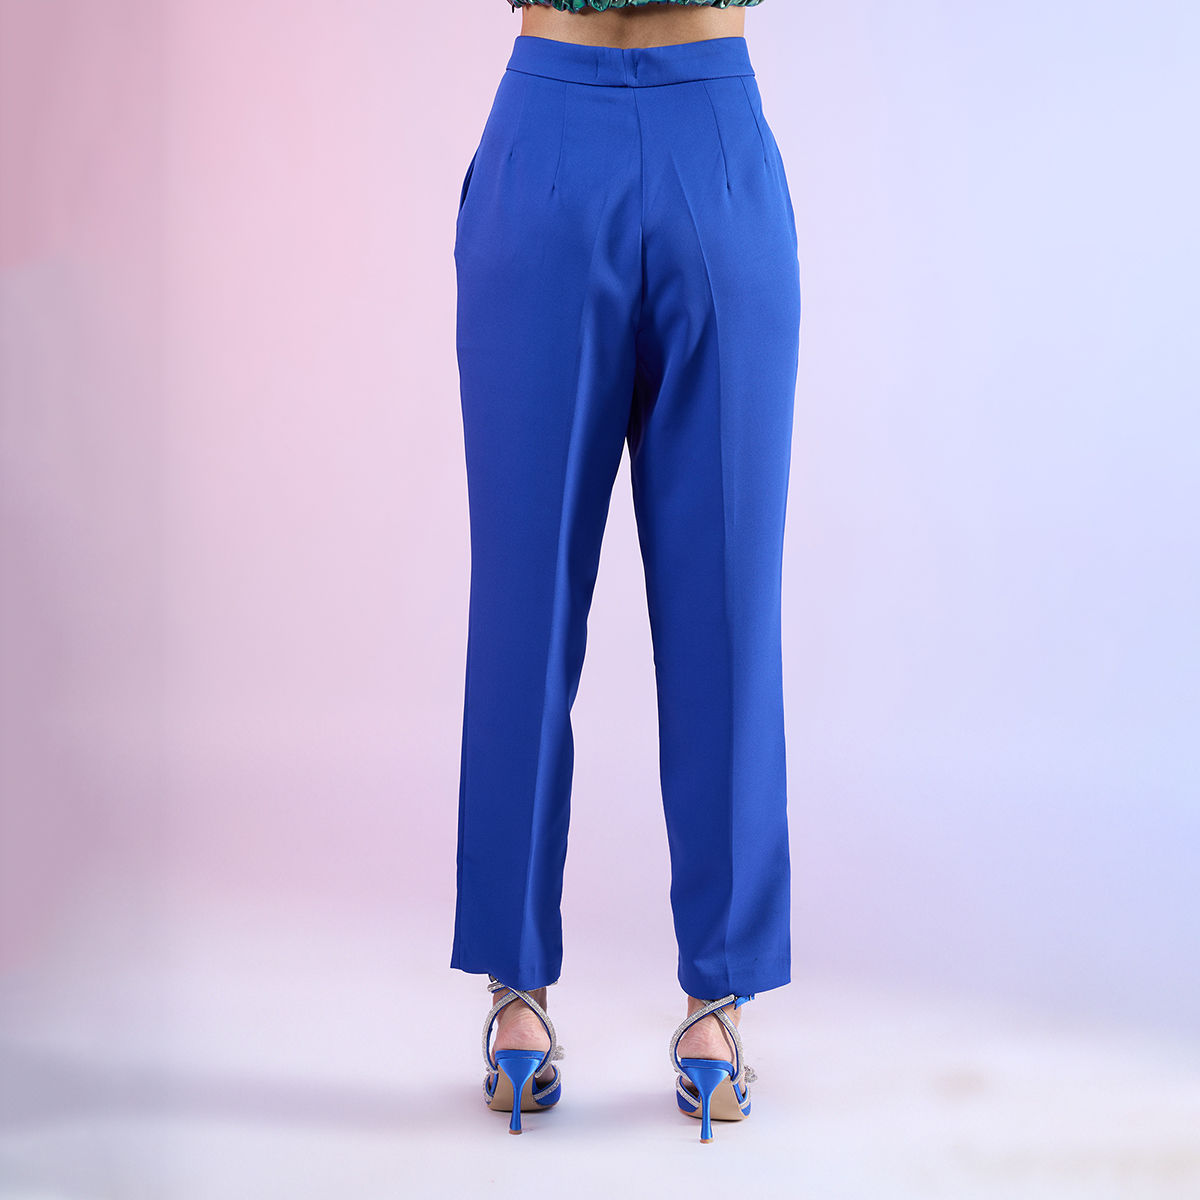 Women Blue Trousers Price in India  Buy Women Blue Trousers online at  Shopsyin